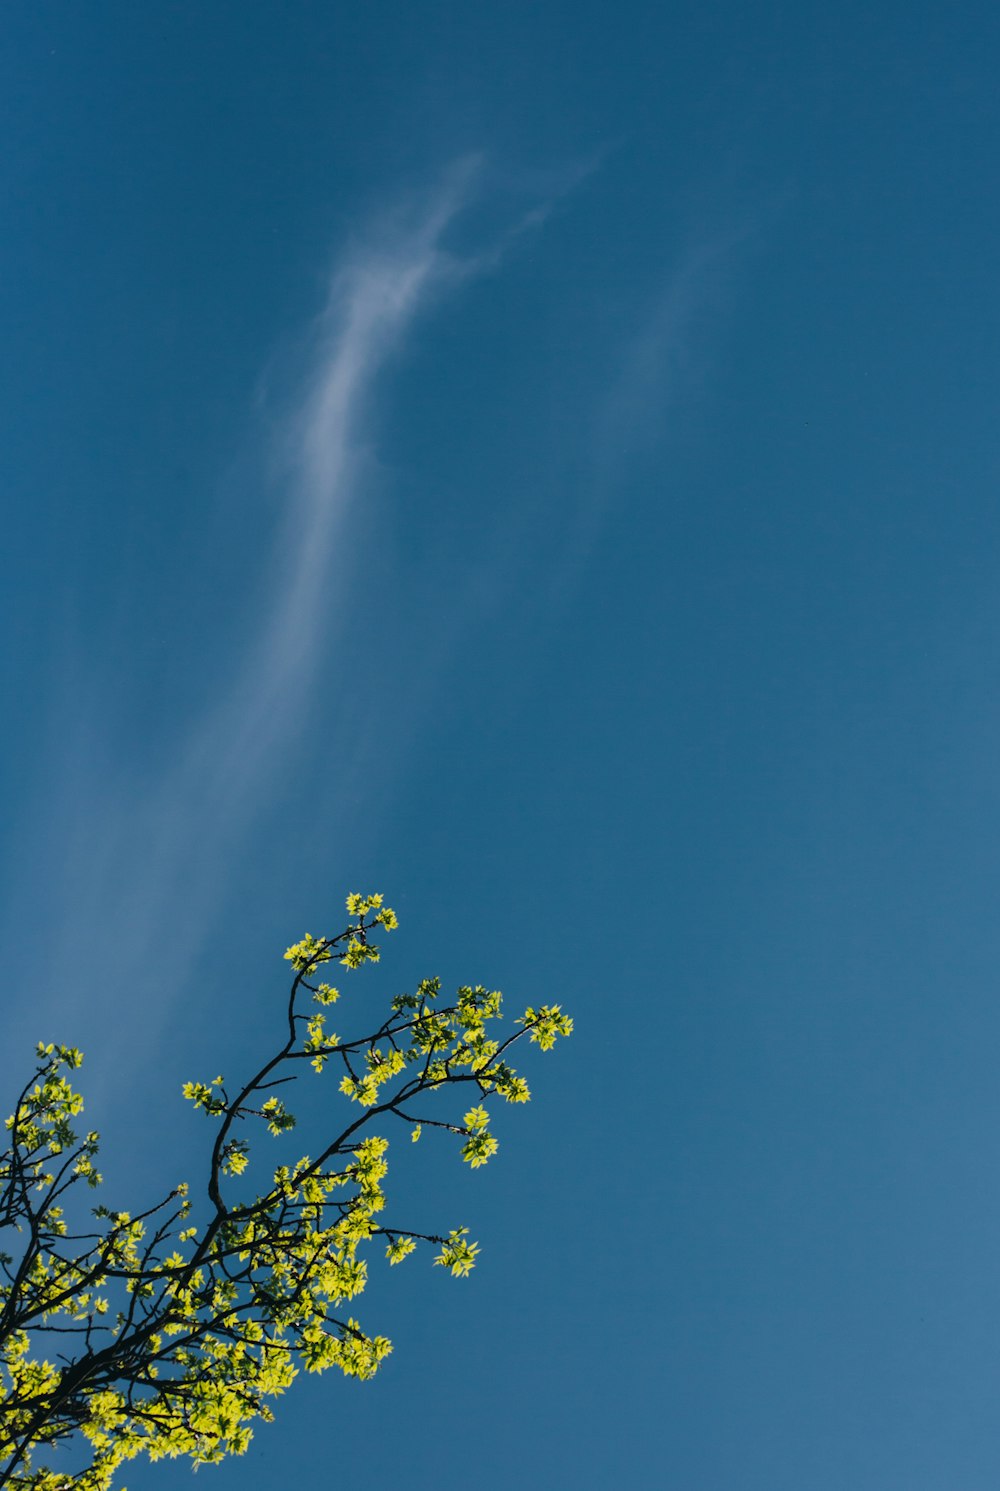 a plane flying in the sky with a tree in the foreground